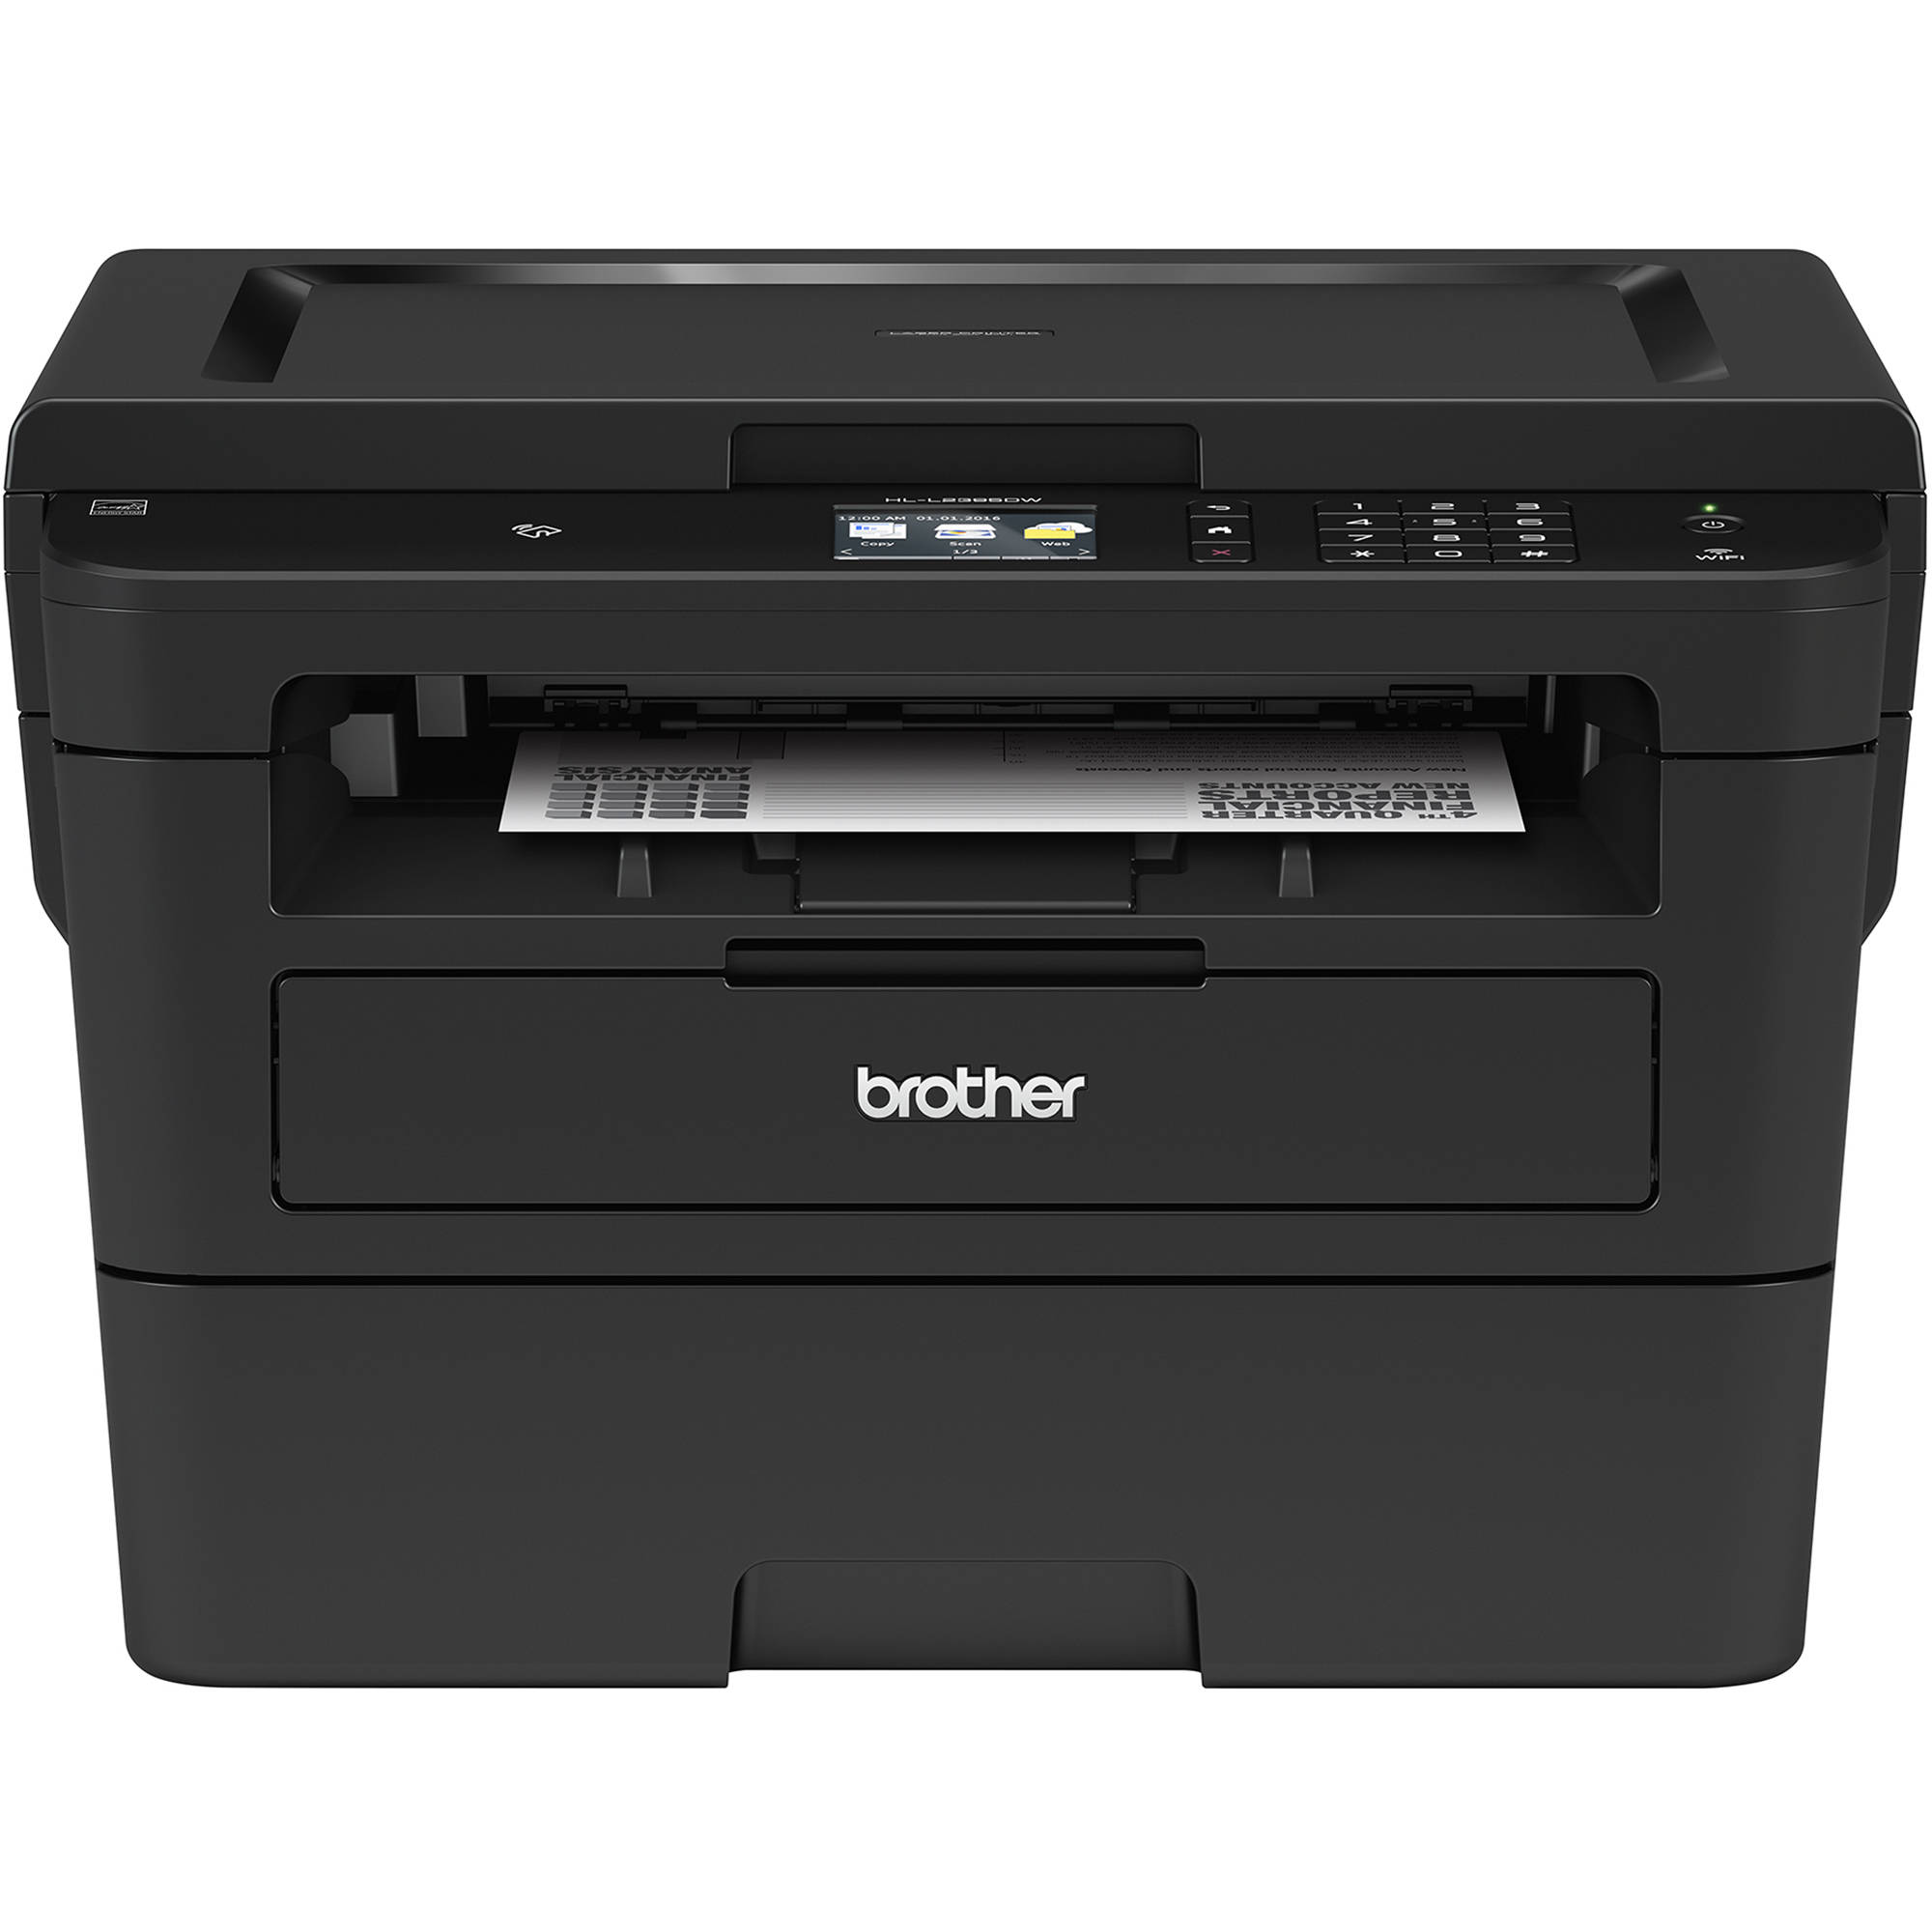 Brother HL-L2395DW All-In-One Monochrome Laser Printer